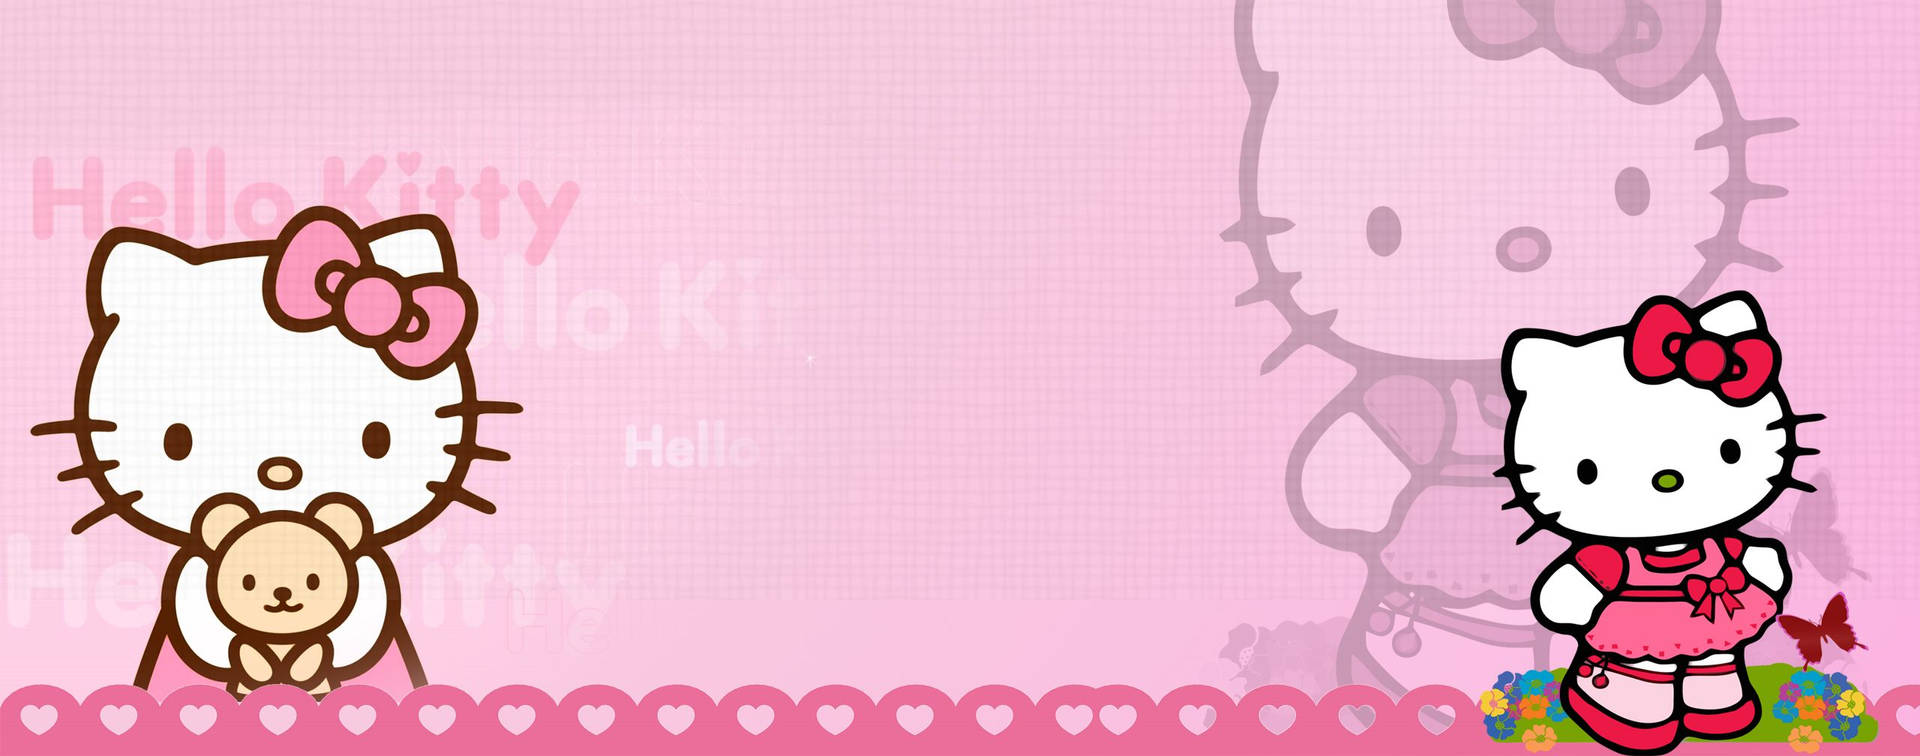 Colorful Hello Kitty, the cutest cat around! Wallpaper